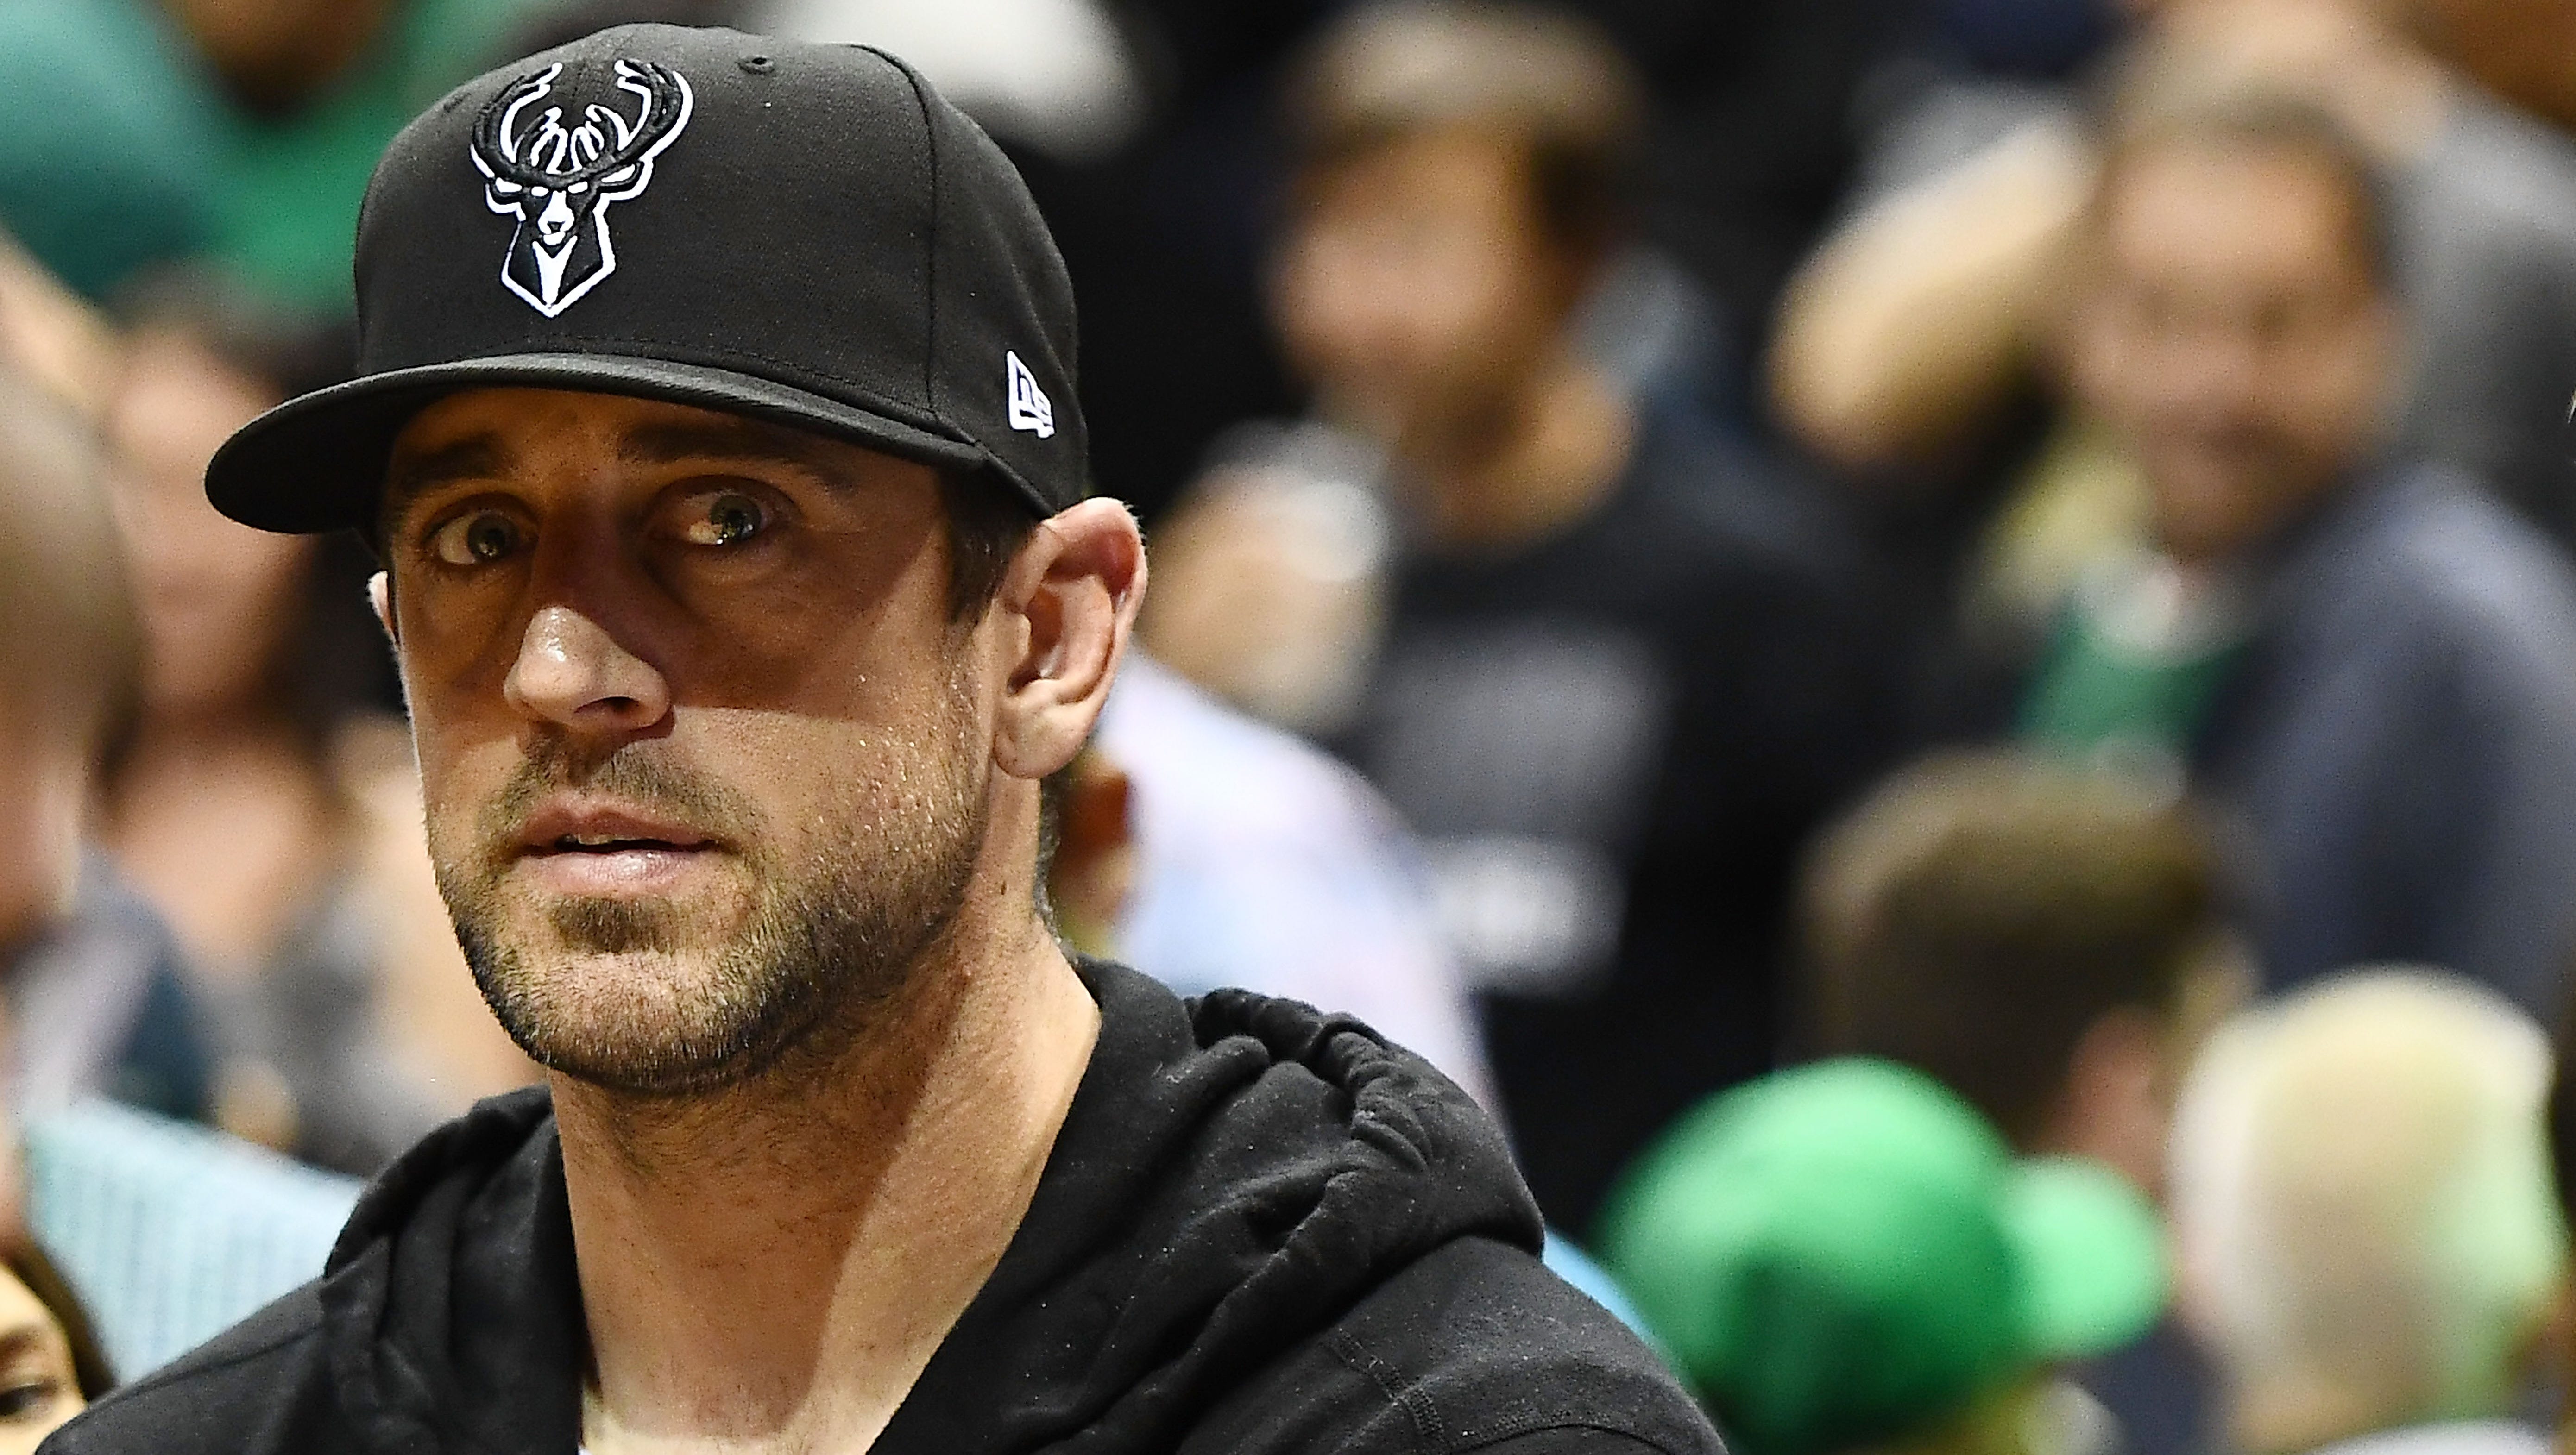 Green Bay Packers QB  Aaron Rodgers watches action during Game 3 on Friday night in Milwaukee.